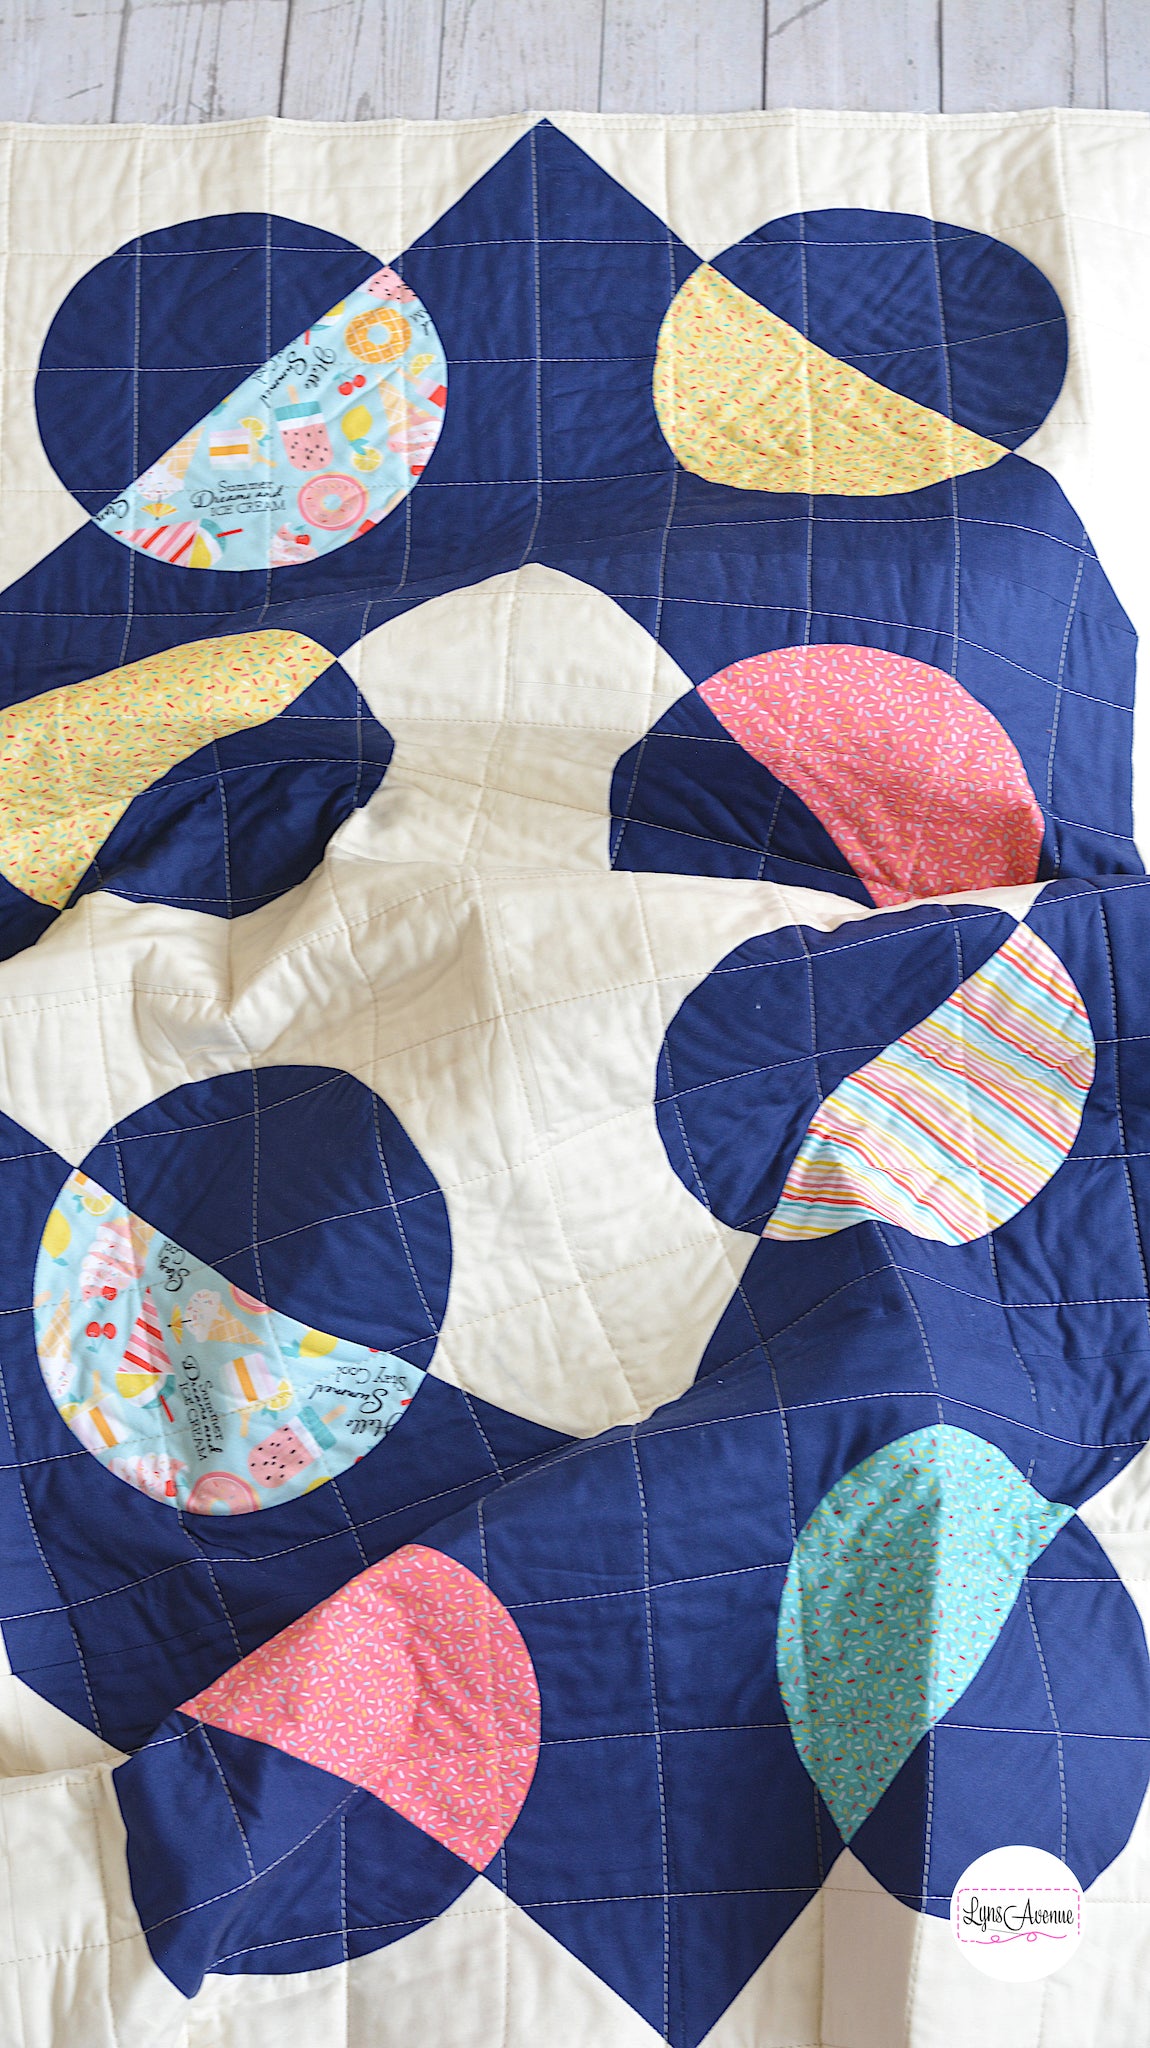 Hook and Pop quilt in navy blue and cream background with pops of colour in yellow, pink, green fabrics with sprinkles and ice cream designs